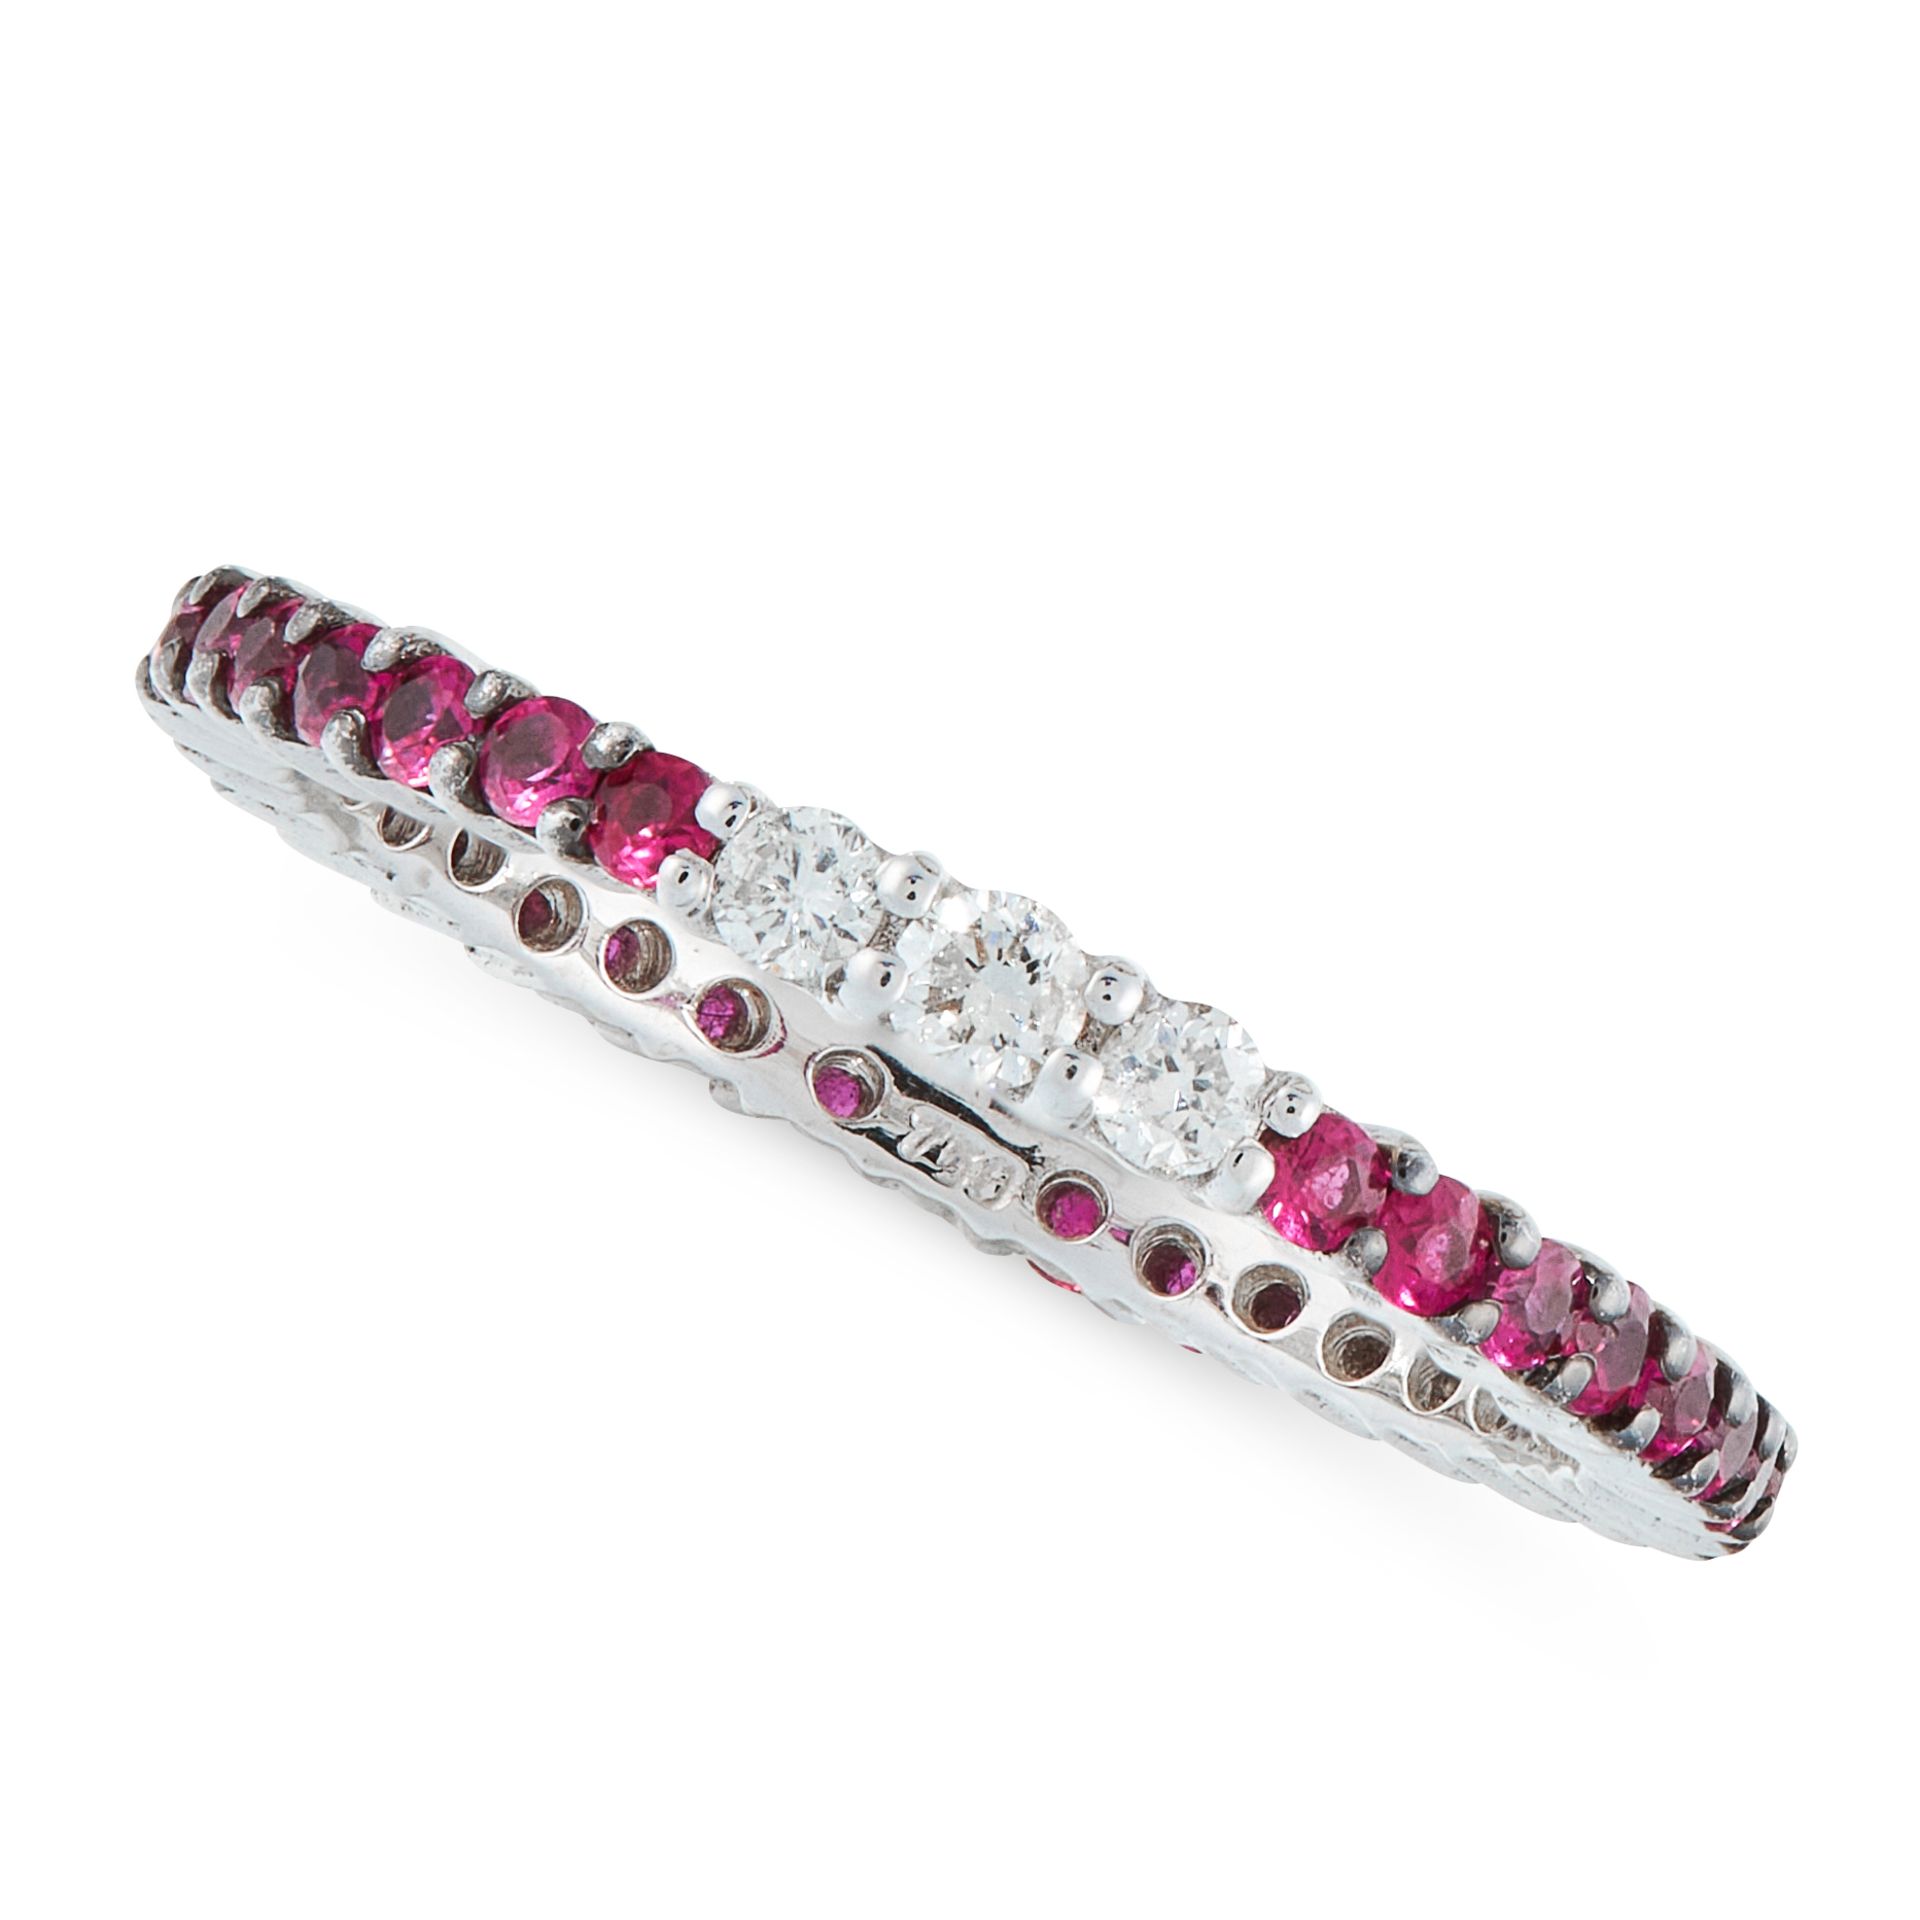 A RUBY AND DIAMOND ETERNITY RING in 18ct white gold, designed as a full eternity, set with round cut